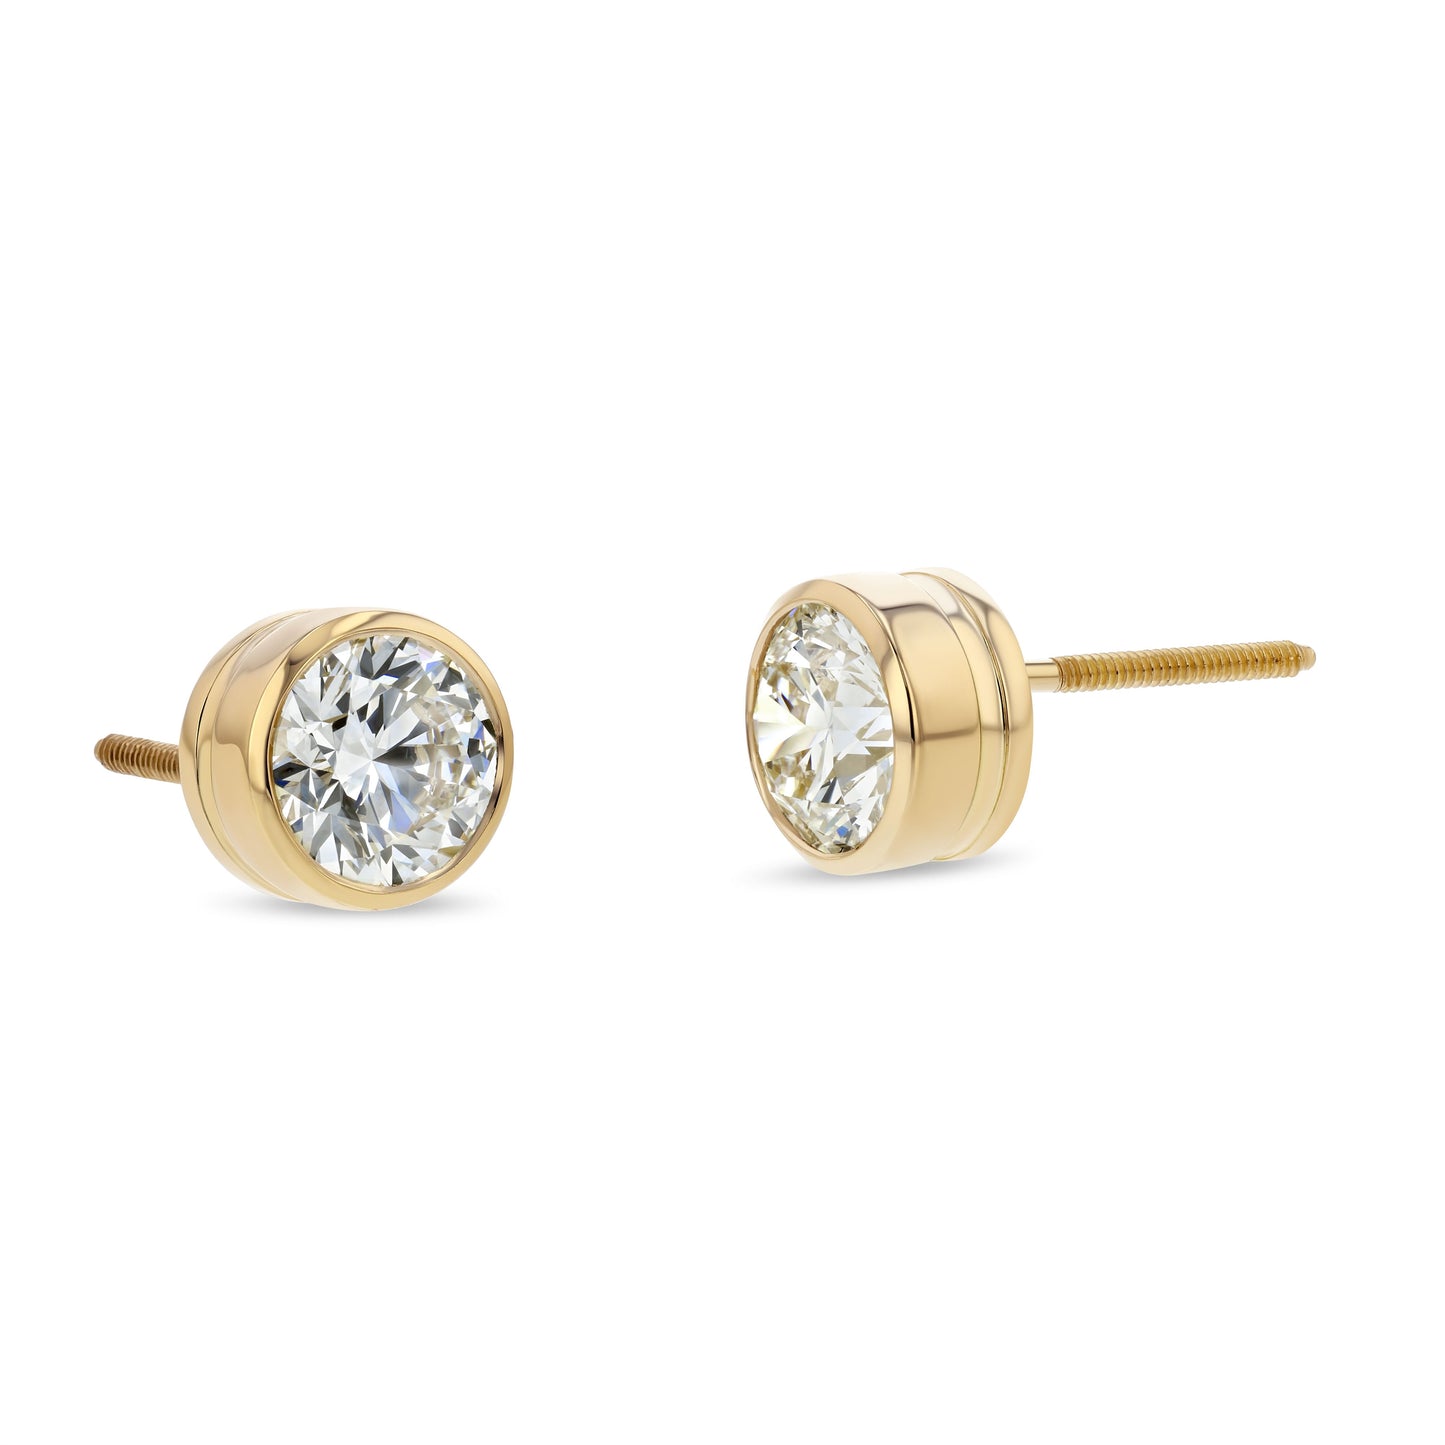 18k Yellow Gold Bezel Round Diamond Stud Earrings 1ctw (5.2mm Ea), G Color, Si3 Clarity